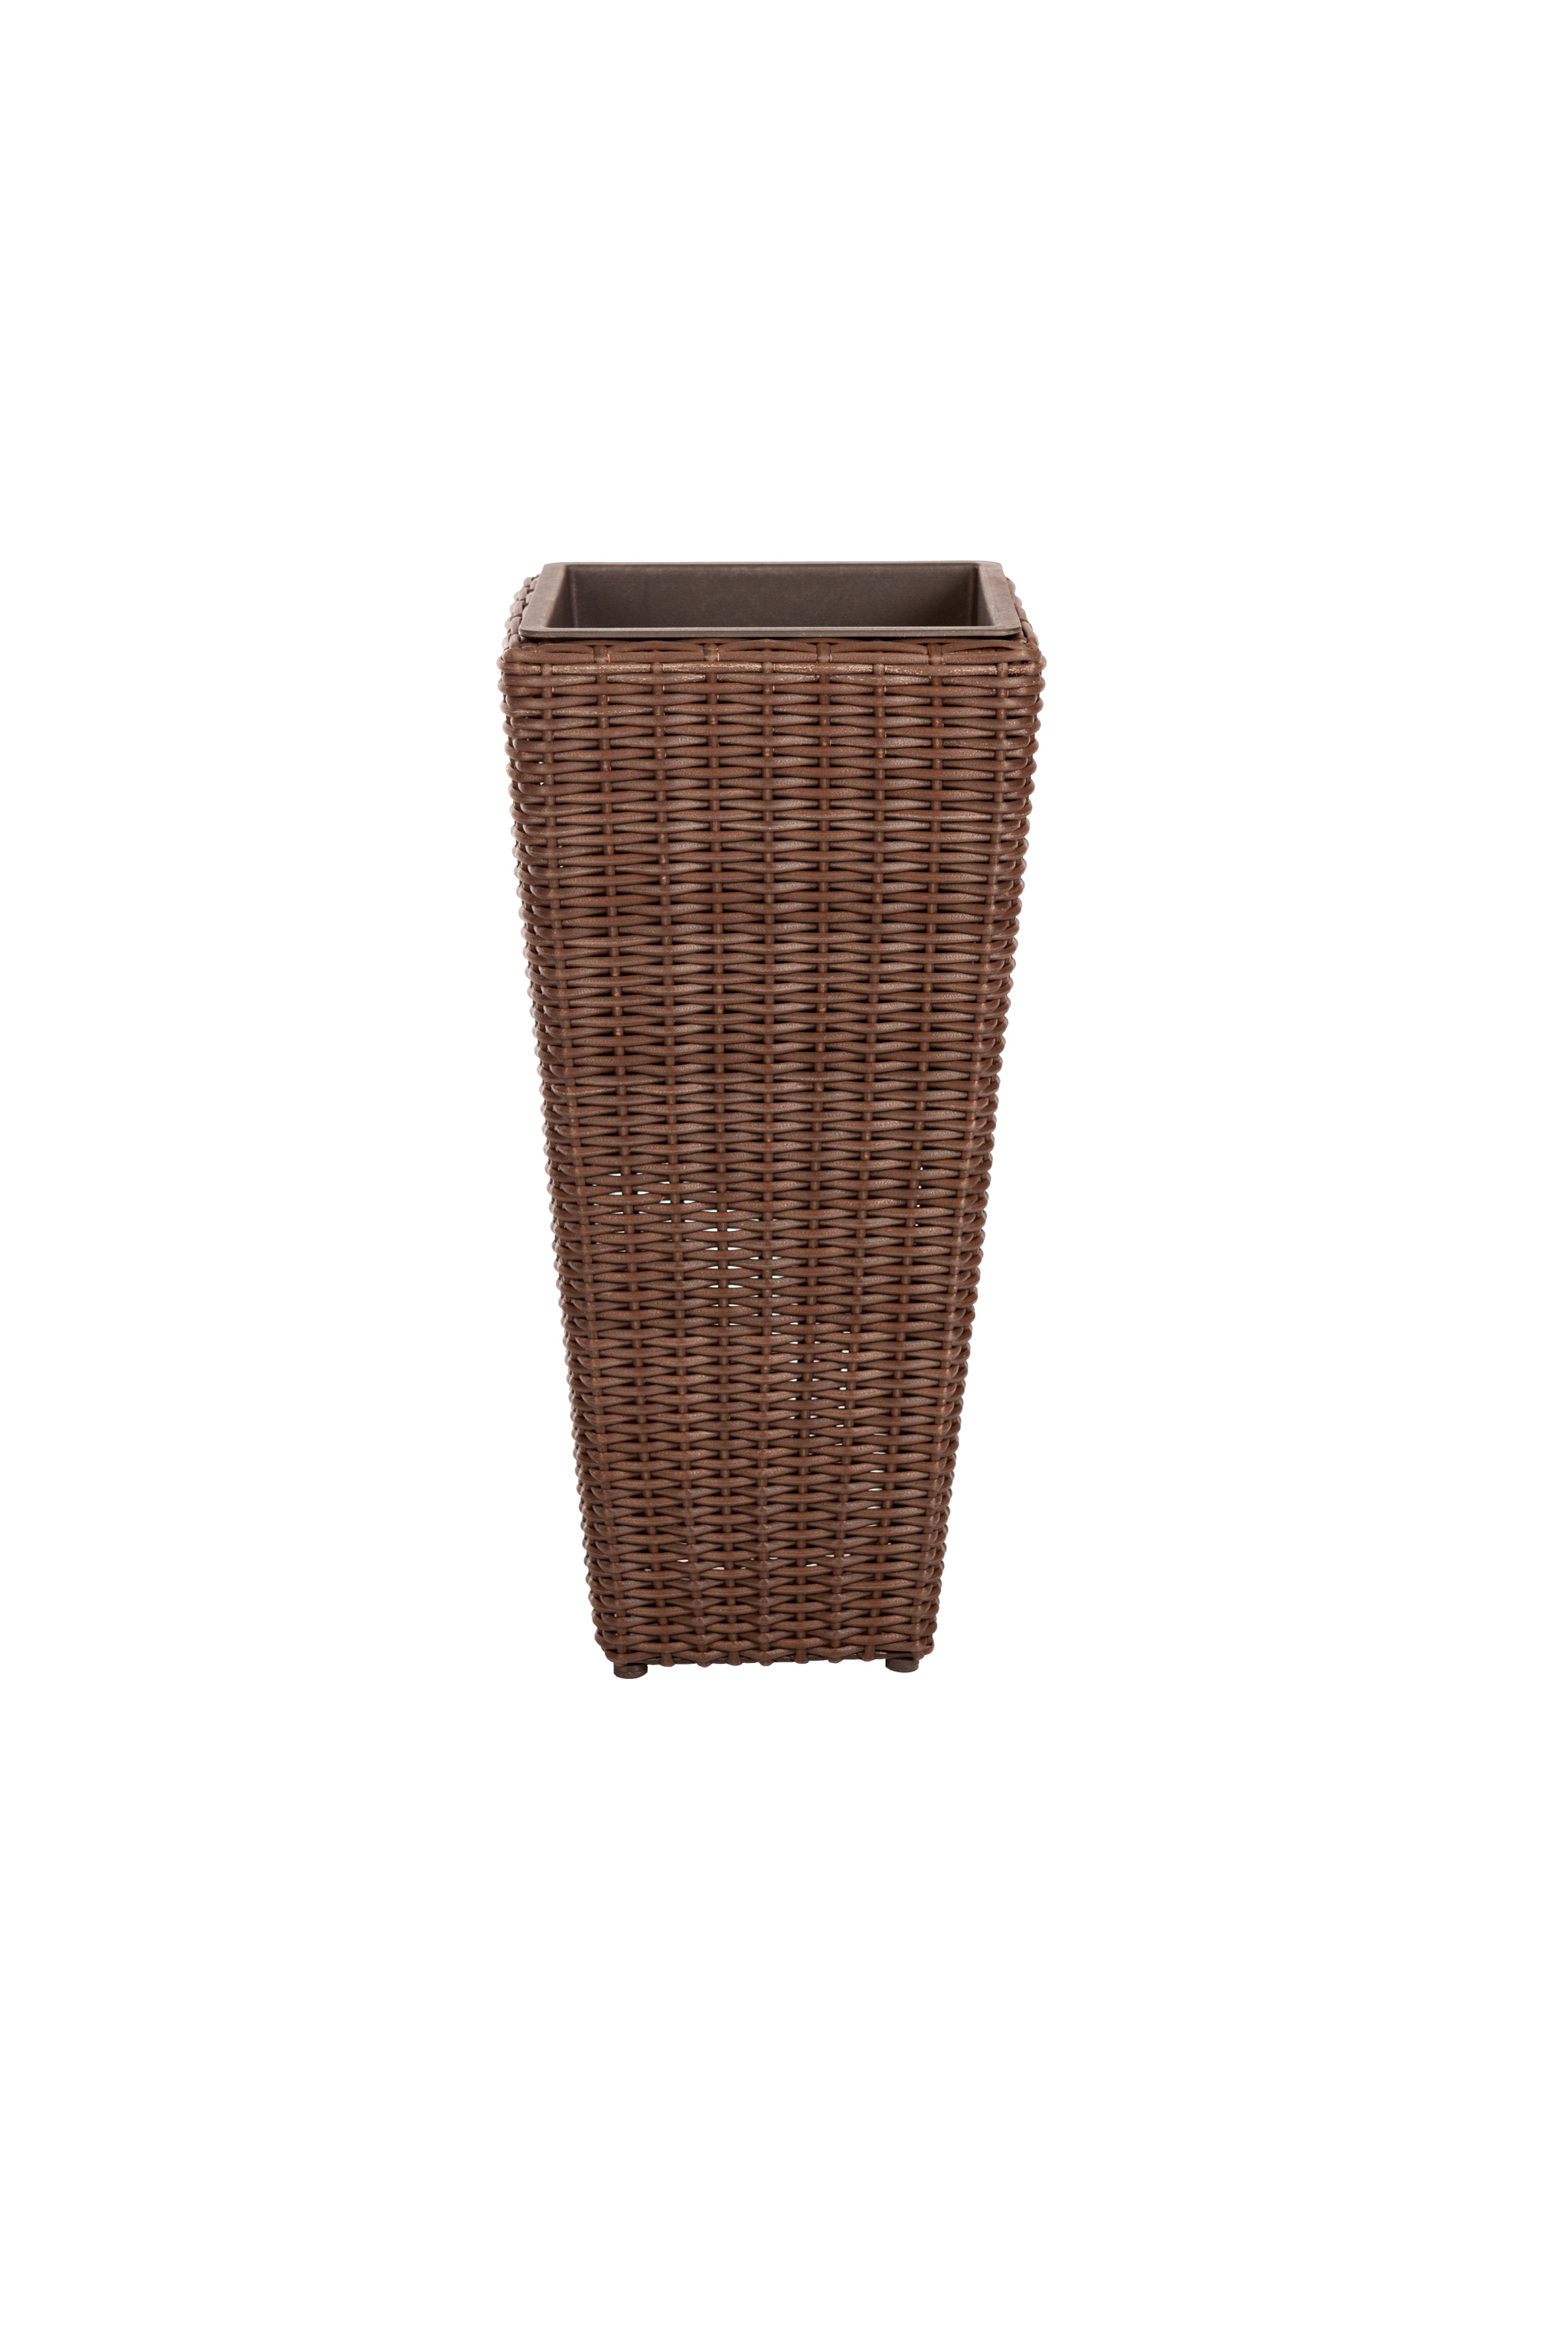 Patio Sense 11" x 11" x 23" Round Brown Resin Plant Planter with Drainage Hole (2 Piece) - image 5 of 9